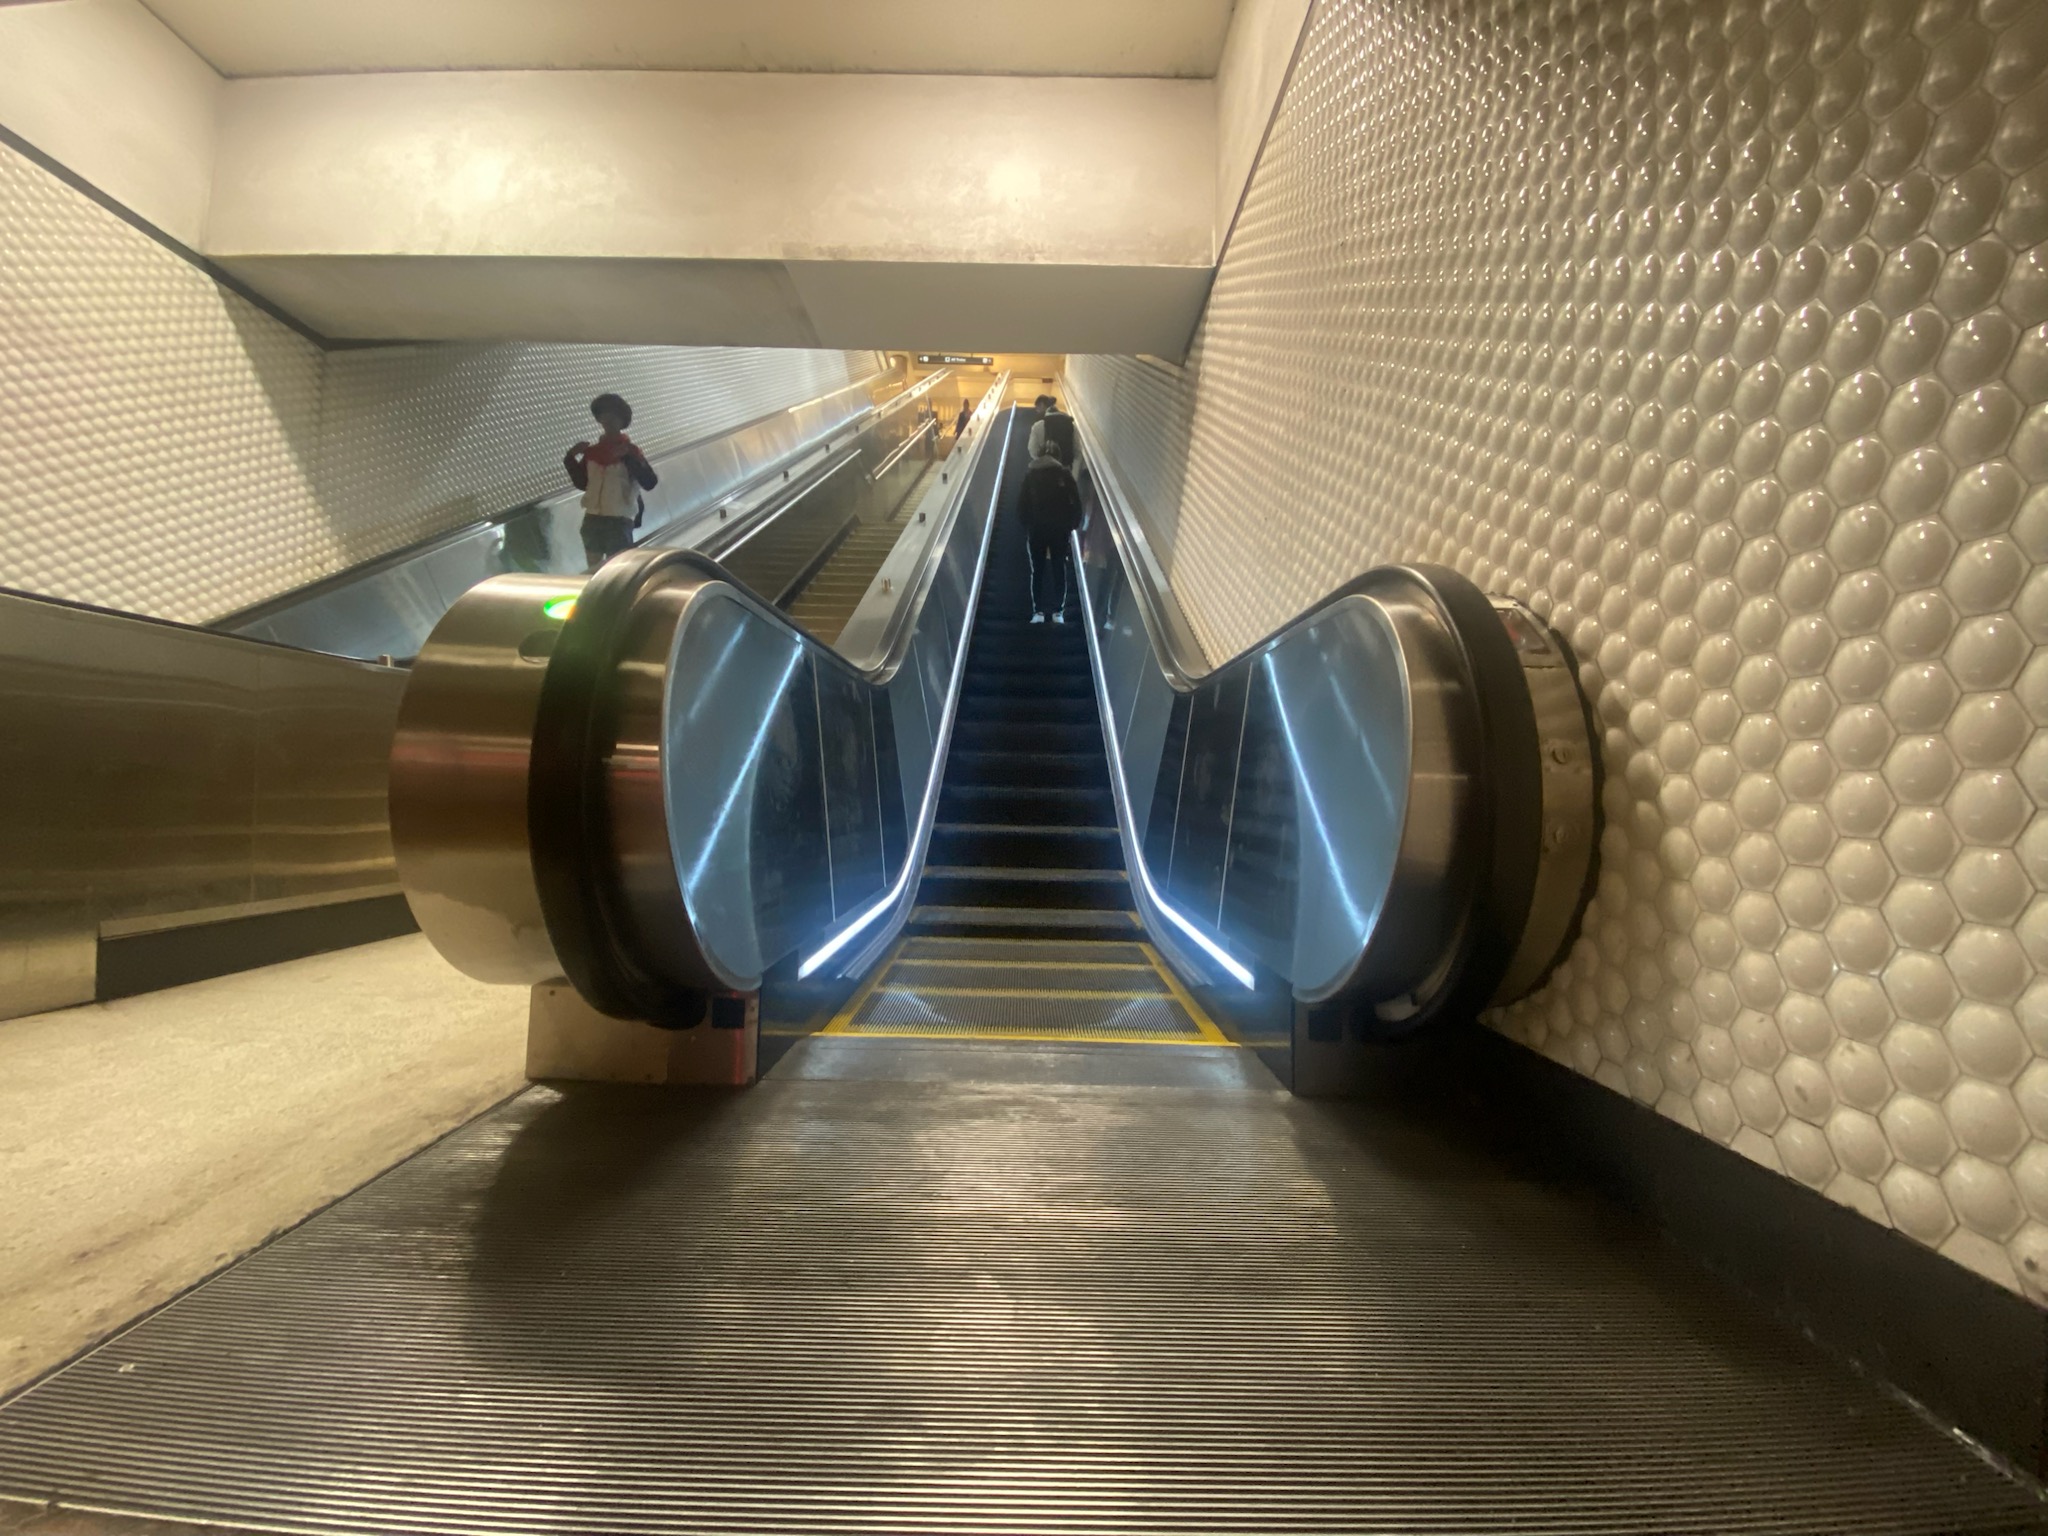 Riders on the rebuilt escalator at Montgomery St. Station